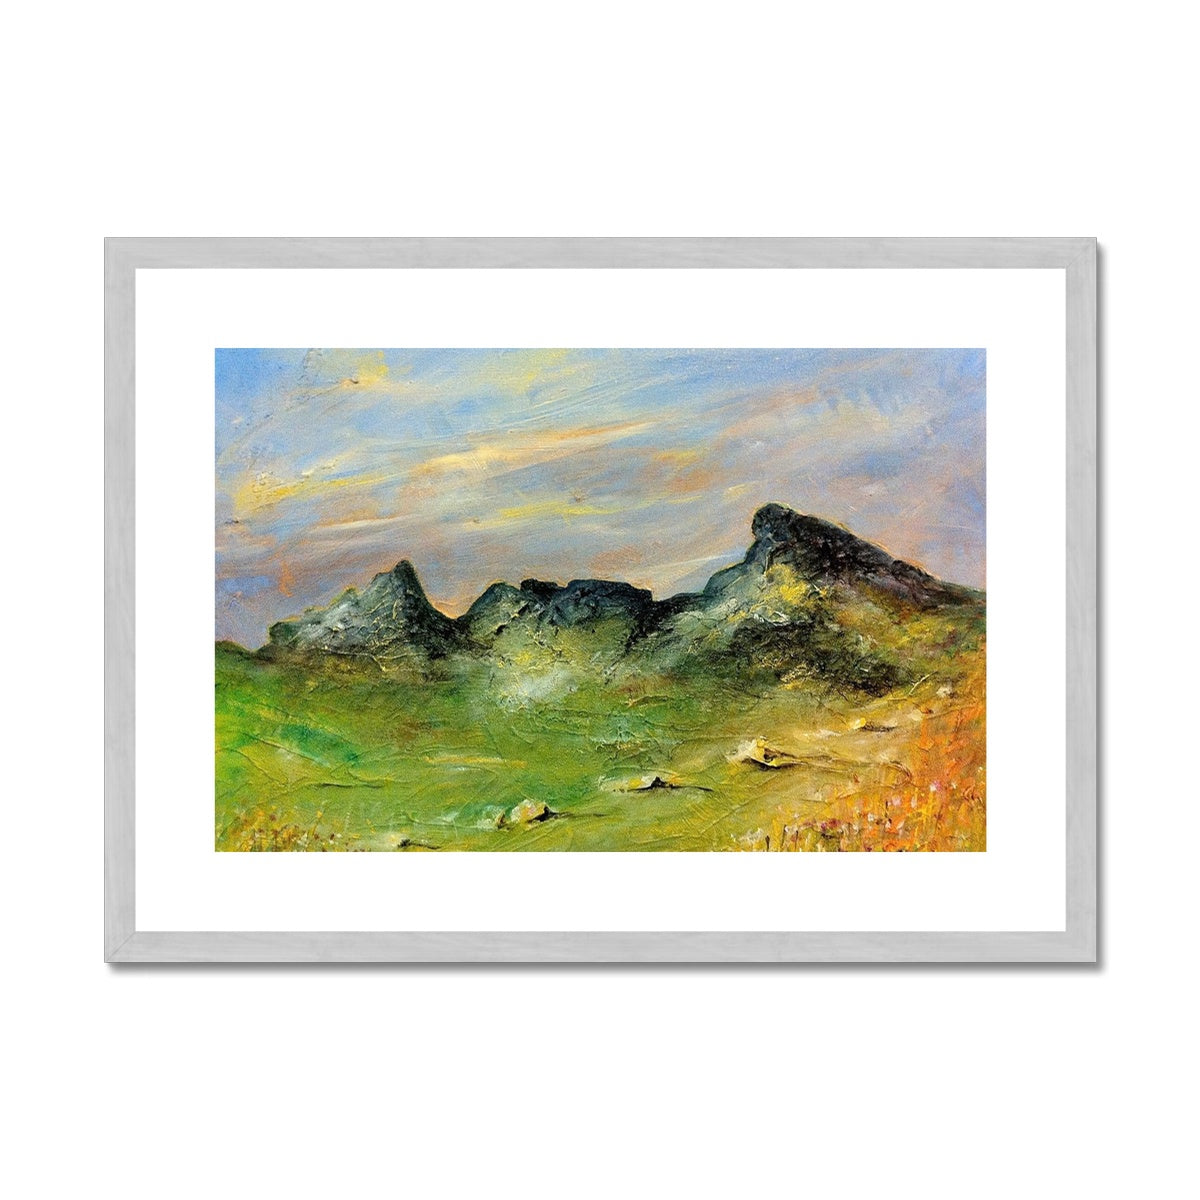 The Cobbler Painting | Antique Framed & Mounted Prints From Scotland-Antique Framed & Mounted Prints-Scottish Lochs & Mountains Art Gallery-A2 Landscape-Silver Frame-Paintings, Prints, Homeware, Art Gifts From Scotland By Scottish Artist Kevin Hunter